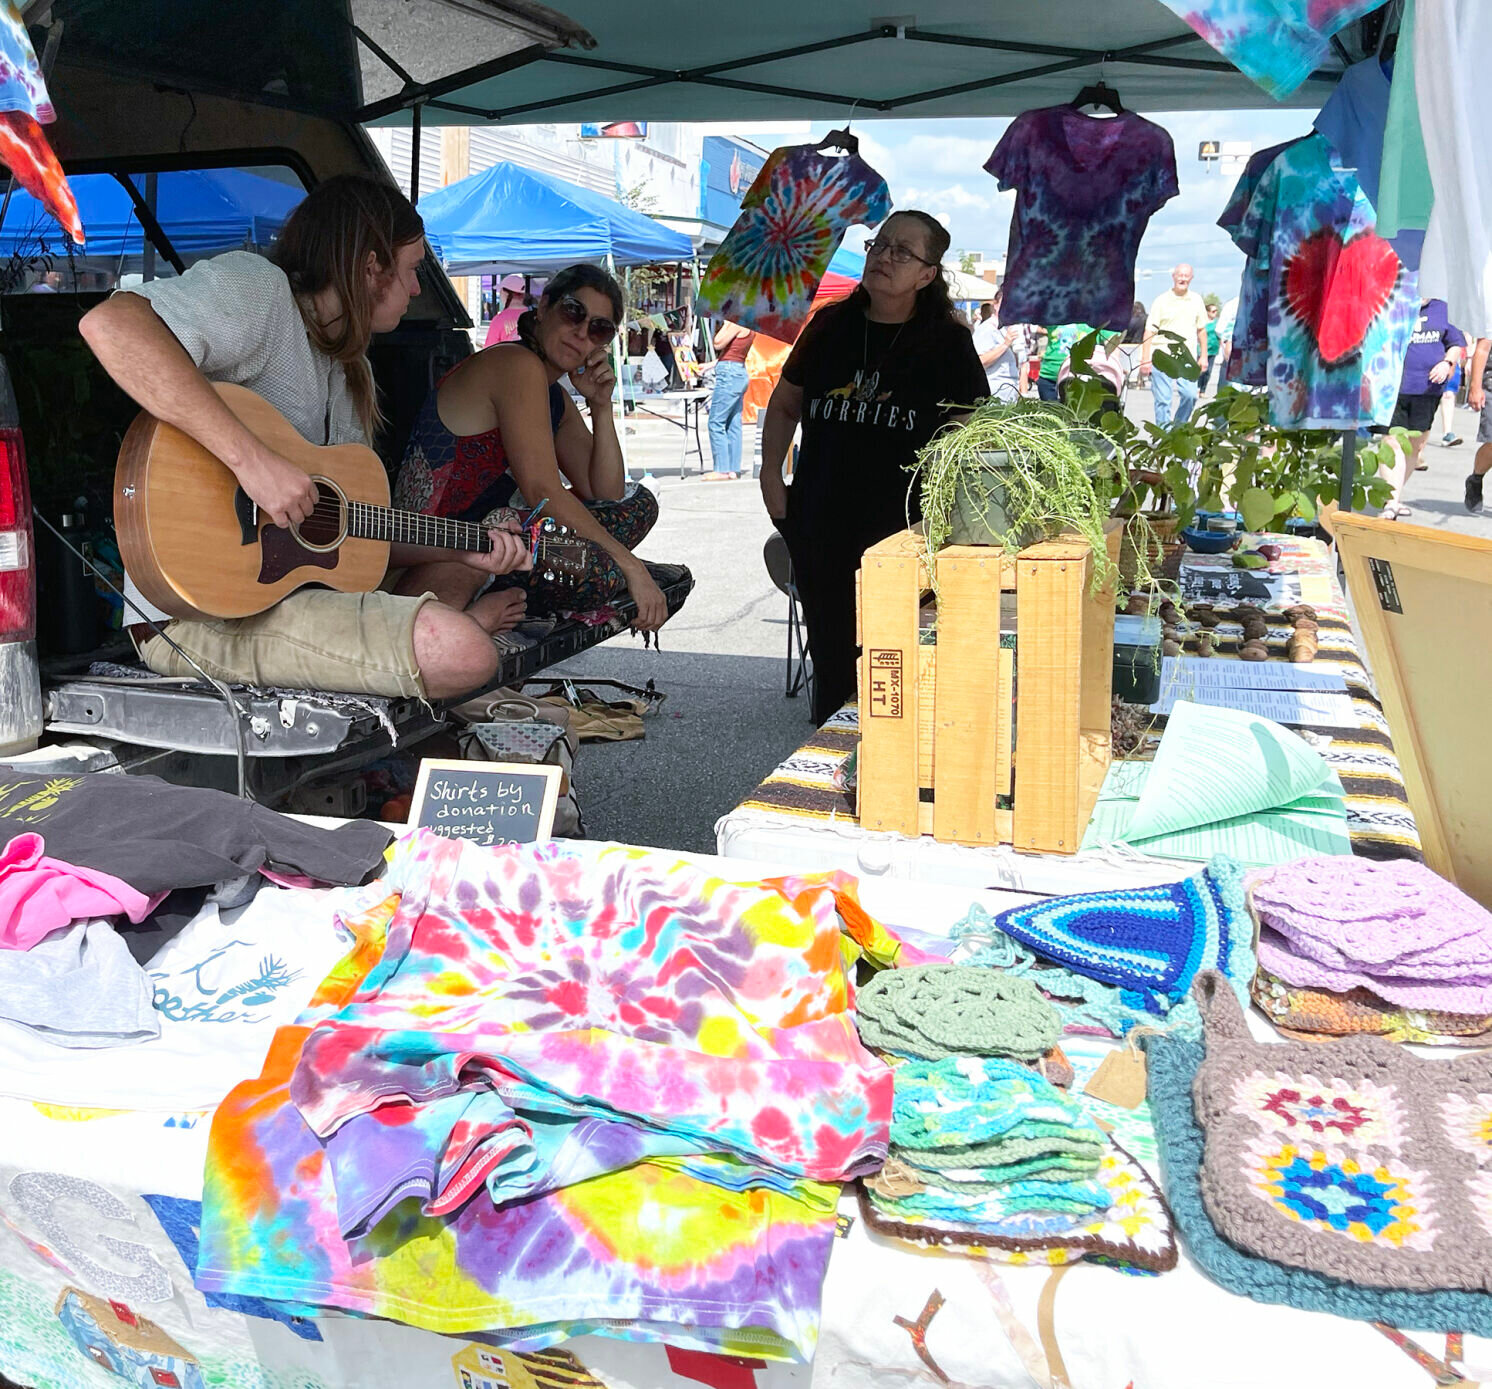 Strumming a guitar as visitors hunt for bargains at the Red Barn Arts and Crafts Festival.